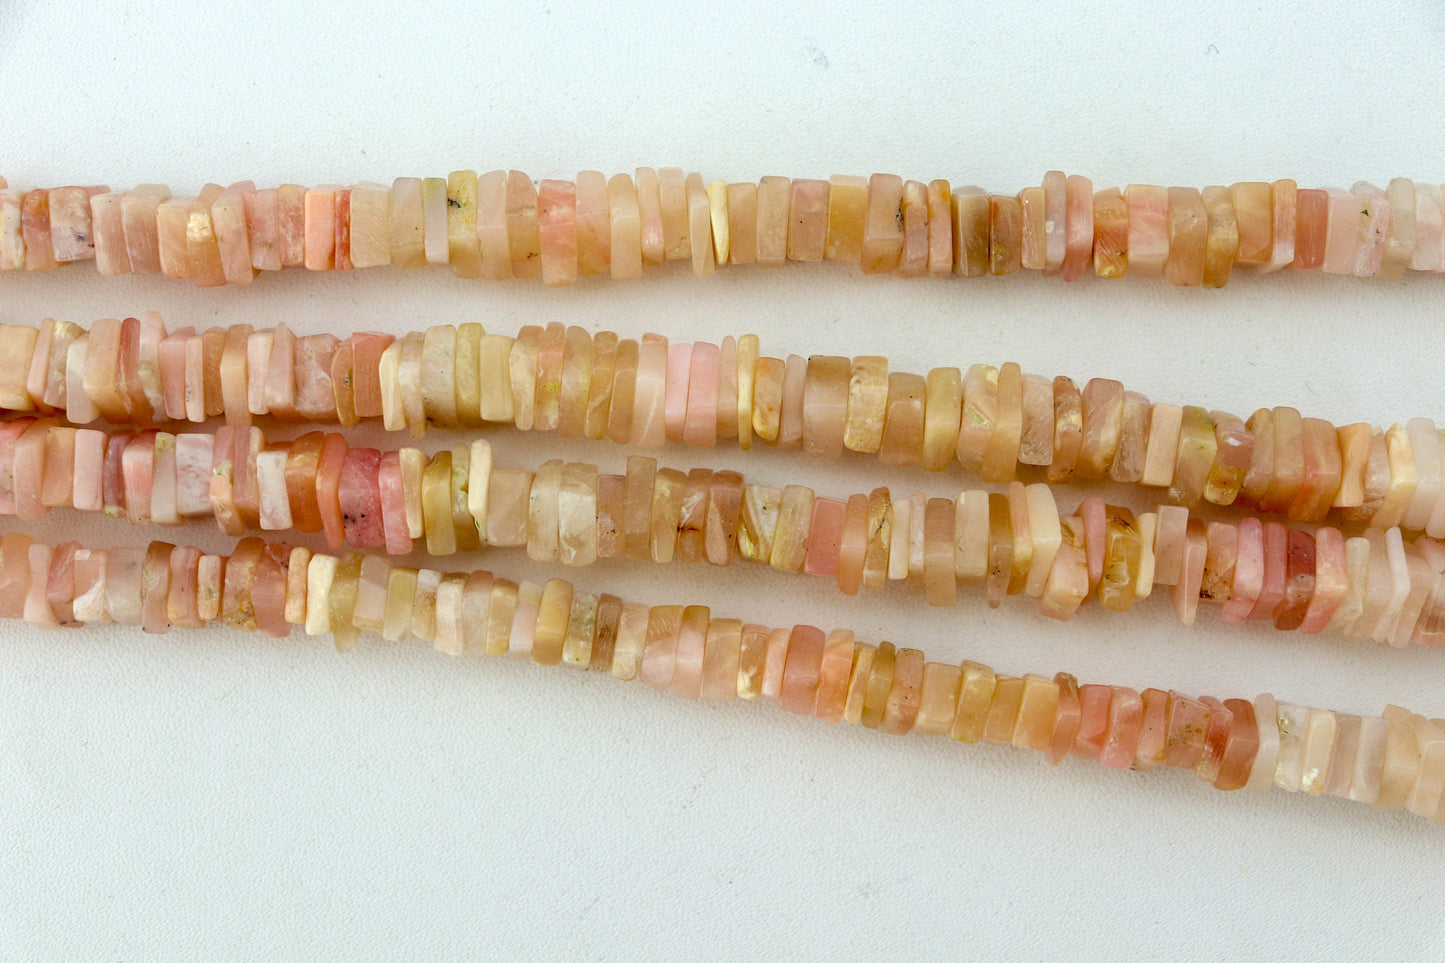 Pink Opal Beads Smooth Square shape Heishi beads, 6mm, Pink opal beads,  Opal Gemstone beads for Jewelry making 16 inch long Beadsforyourjewelry